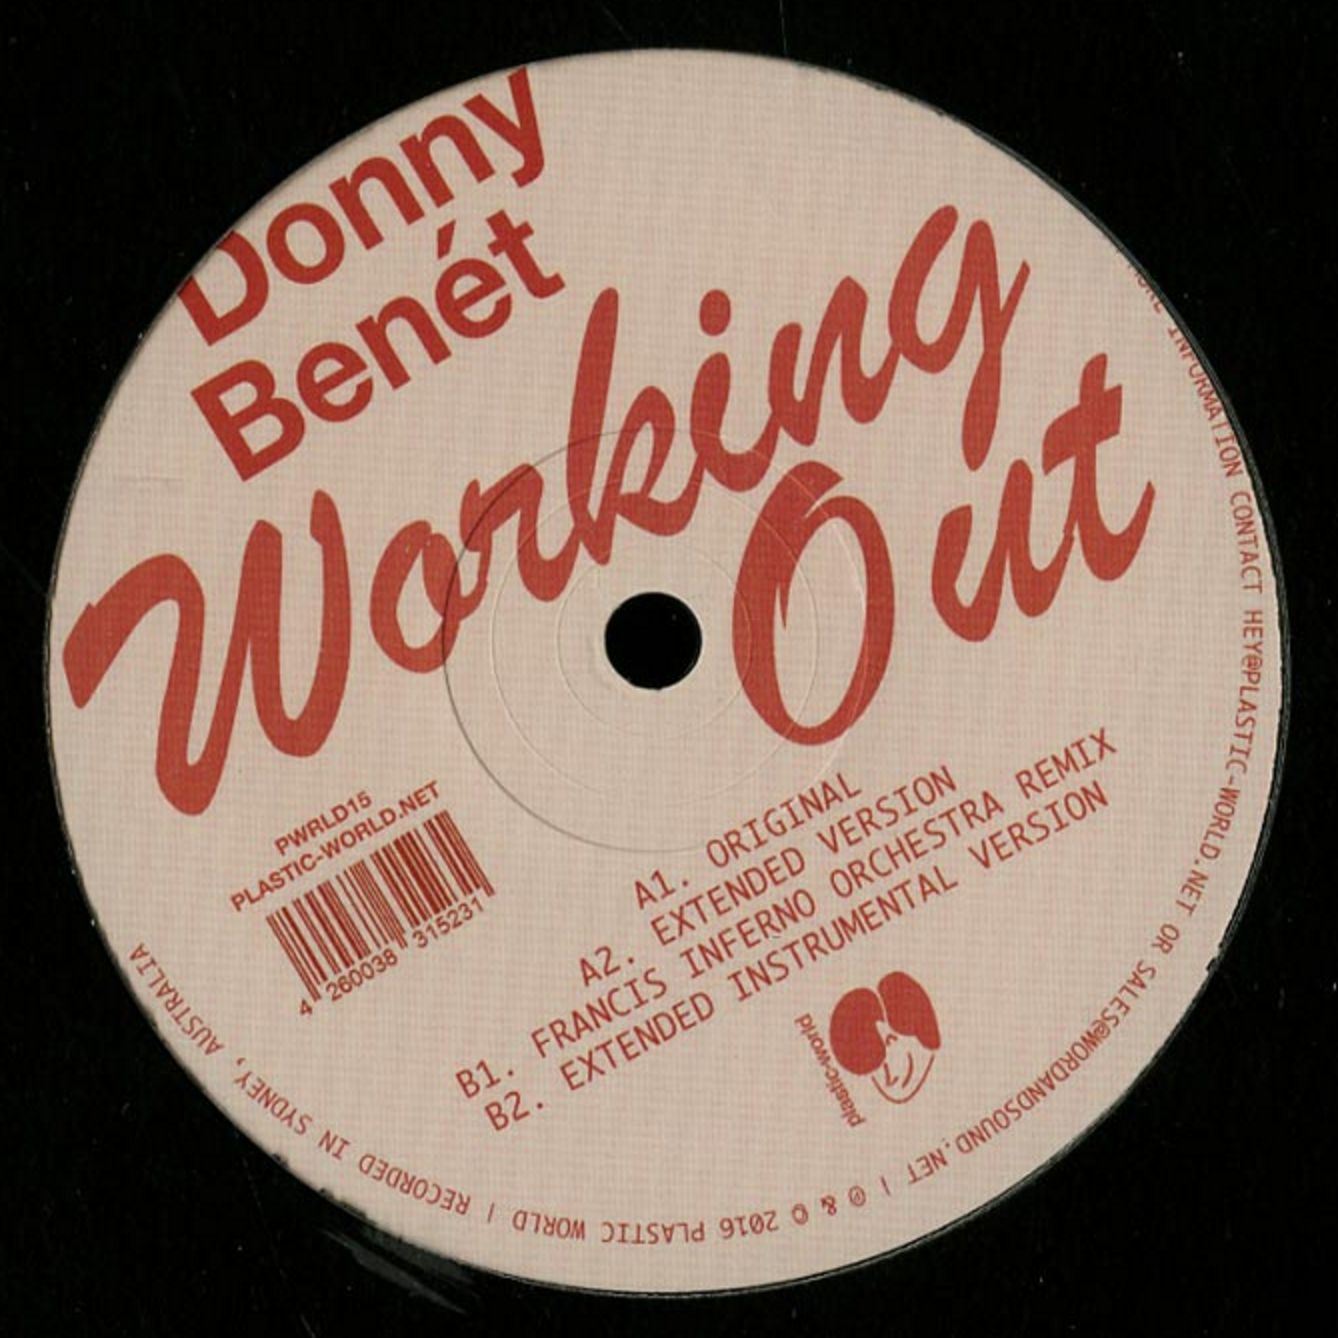 Descarca Donny Benet - Working Out (FIO's Yarra Bend Reprise)